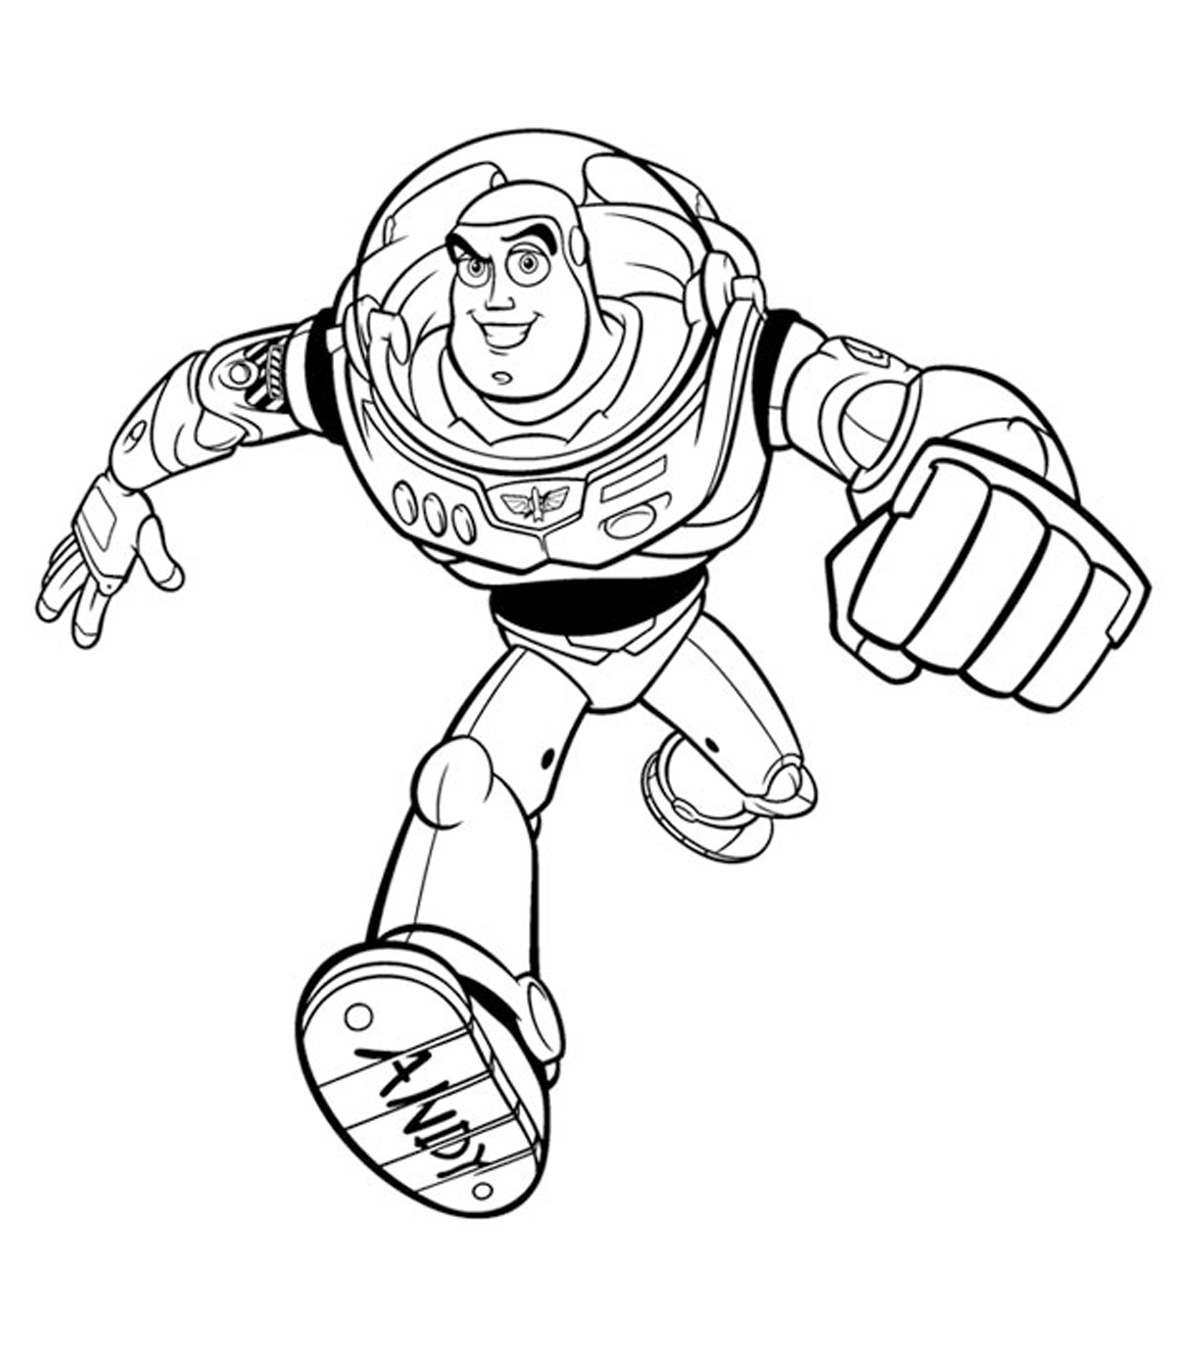 Ryans World Free Printable Coloring Pages - Free Printable Coloring Pages for Kids and Adults